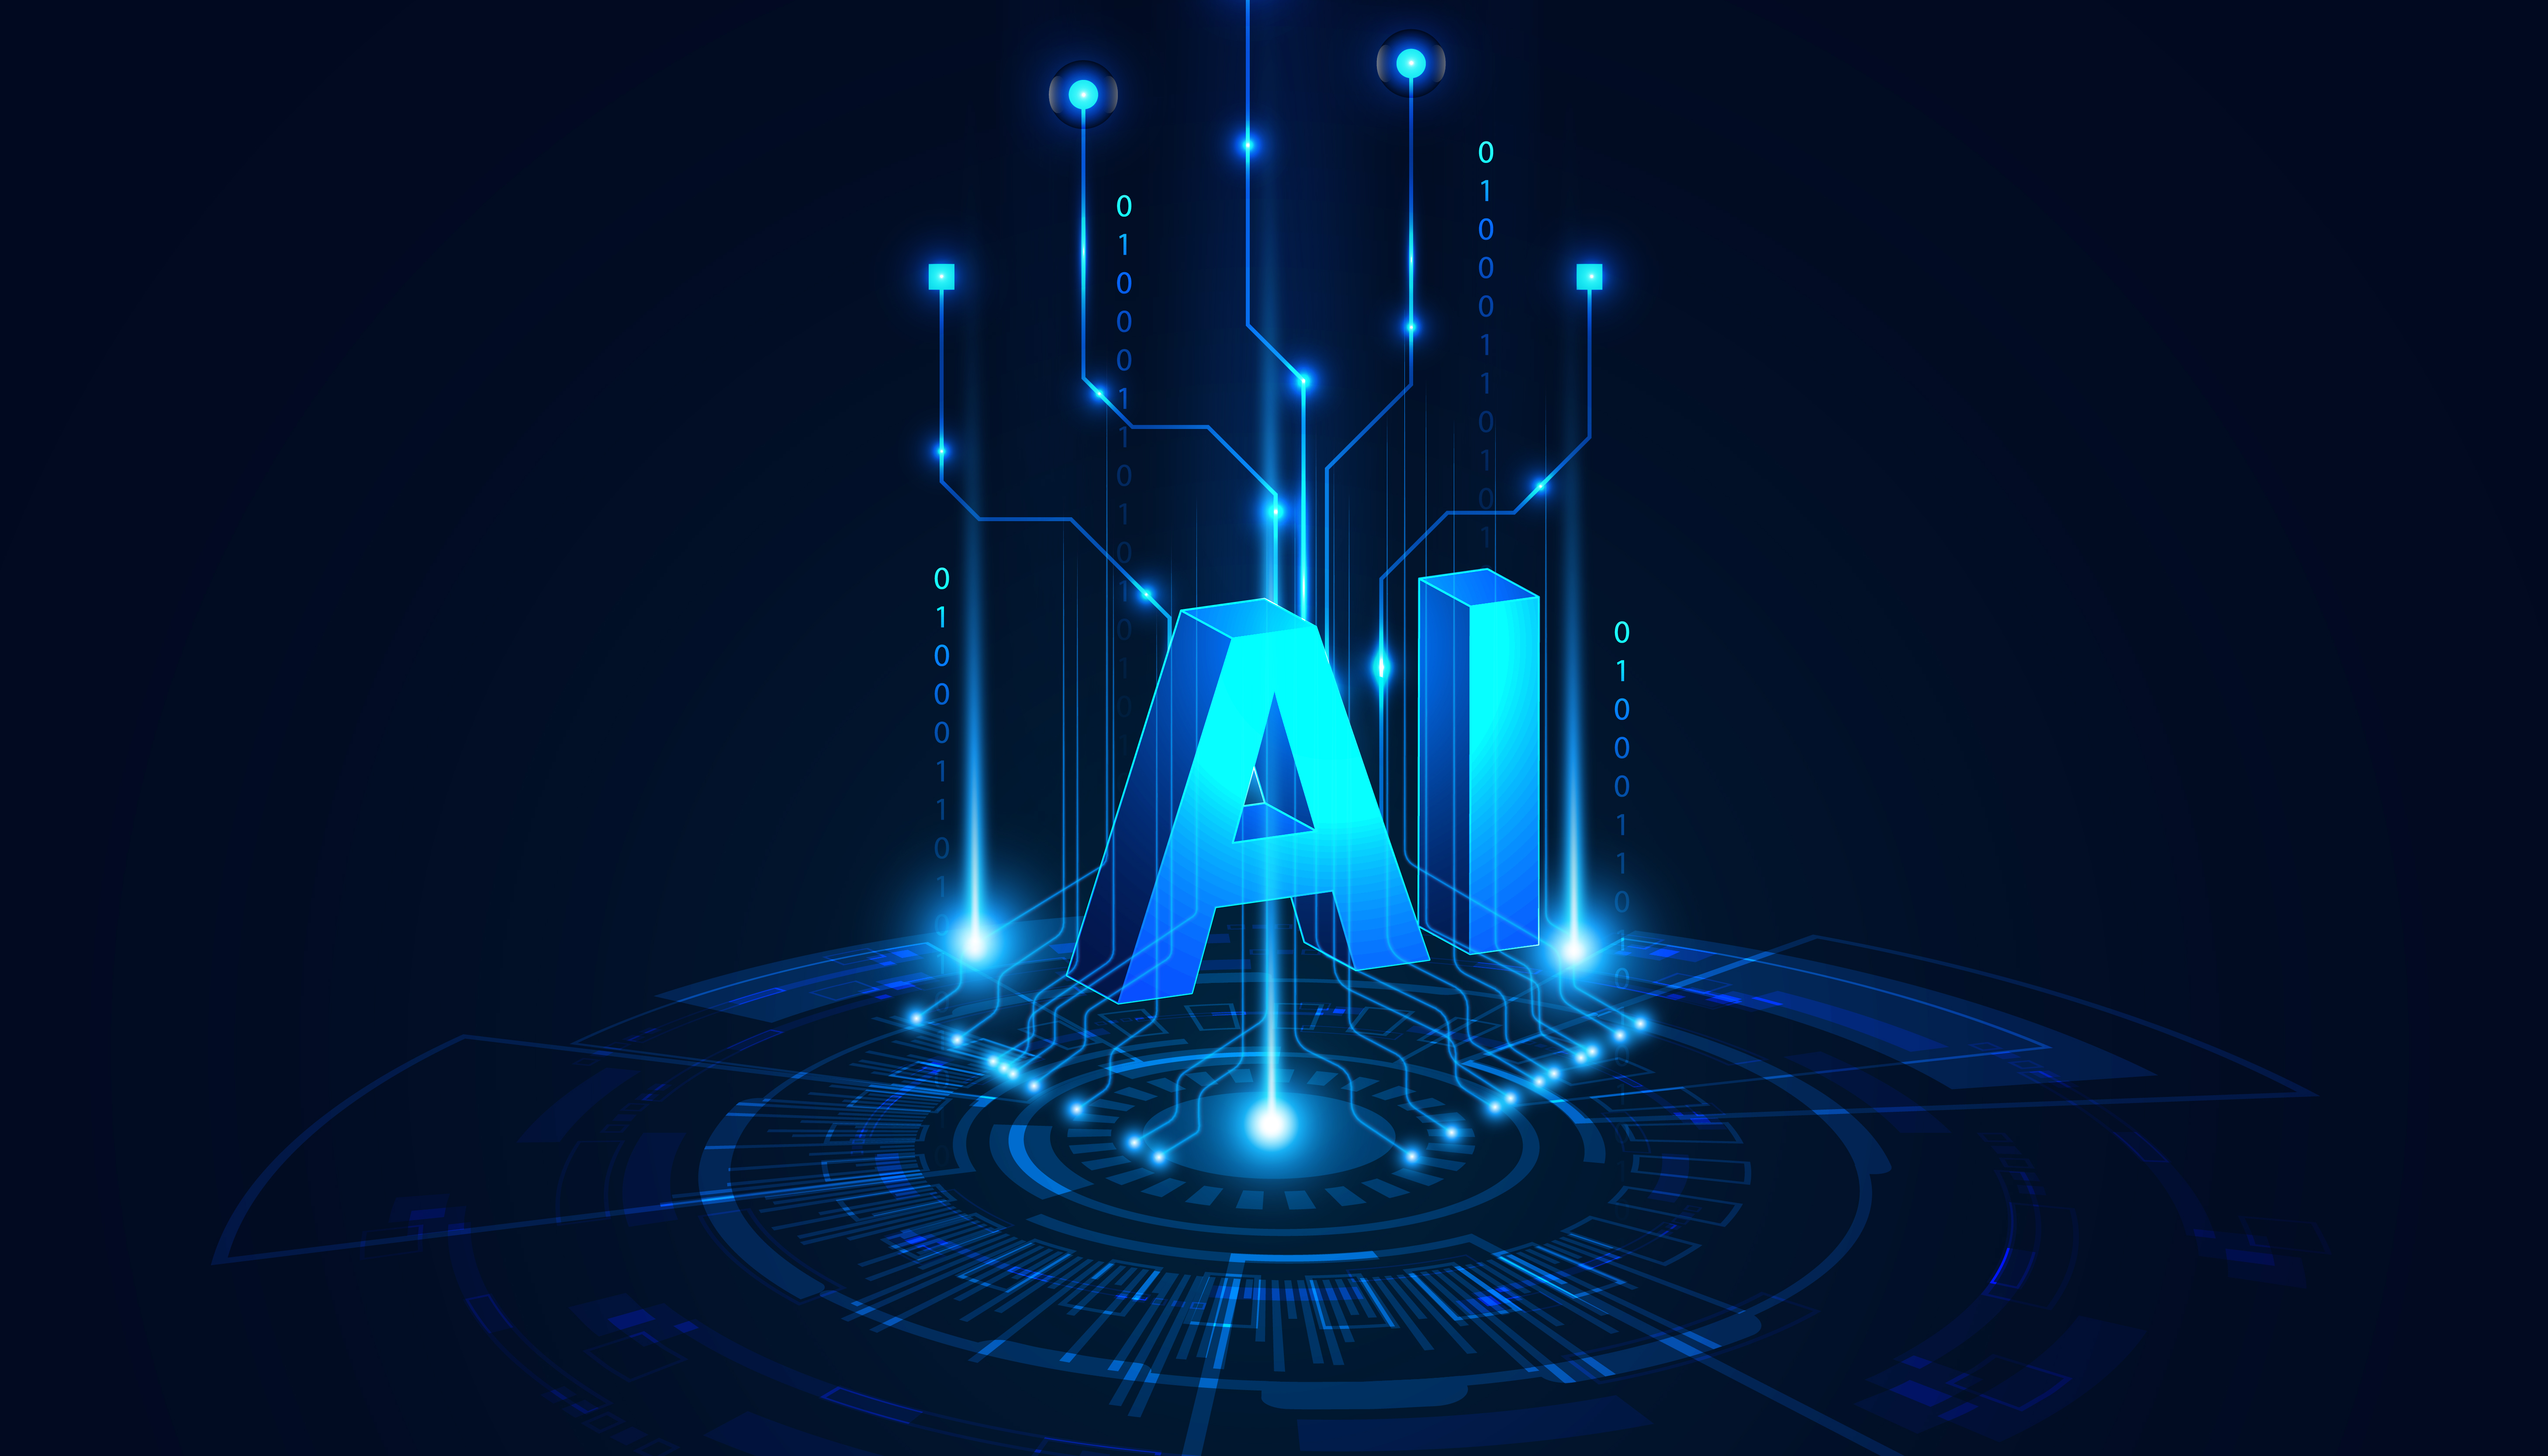 Reduce Your Workload With Free AI Tools